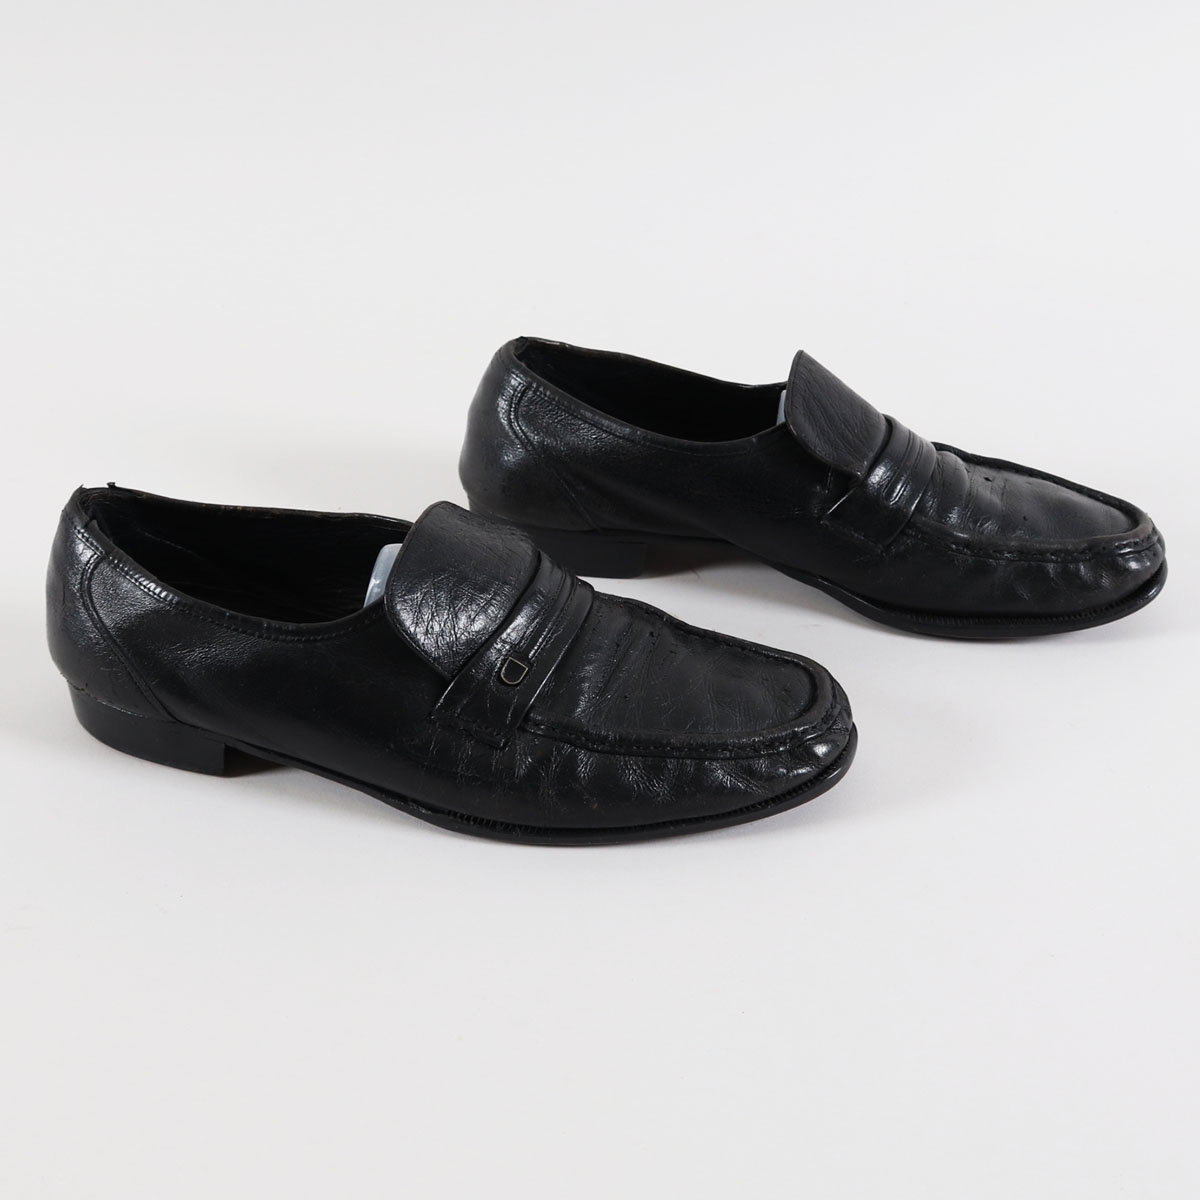 Auction: Michael Jackson's Loafers - MJVibe